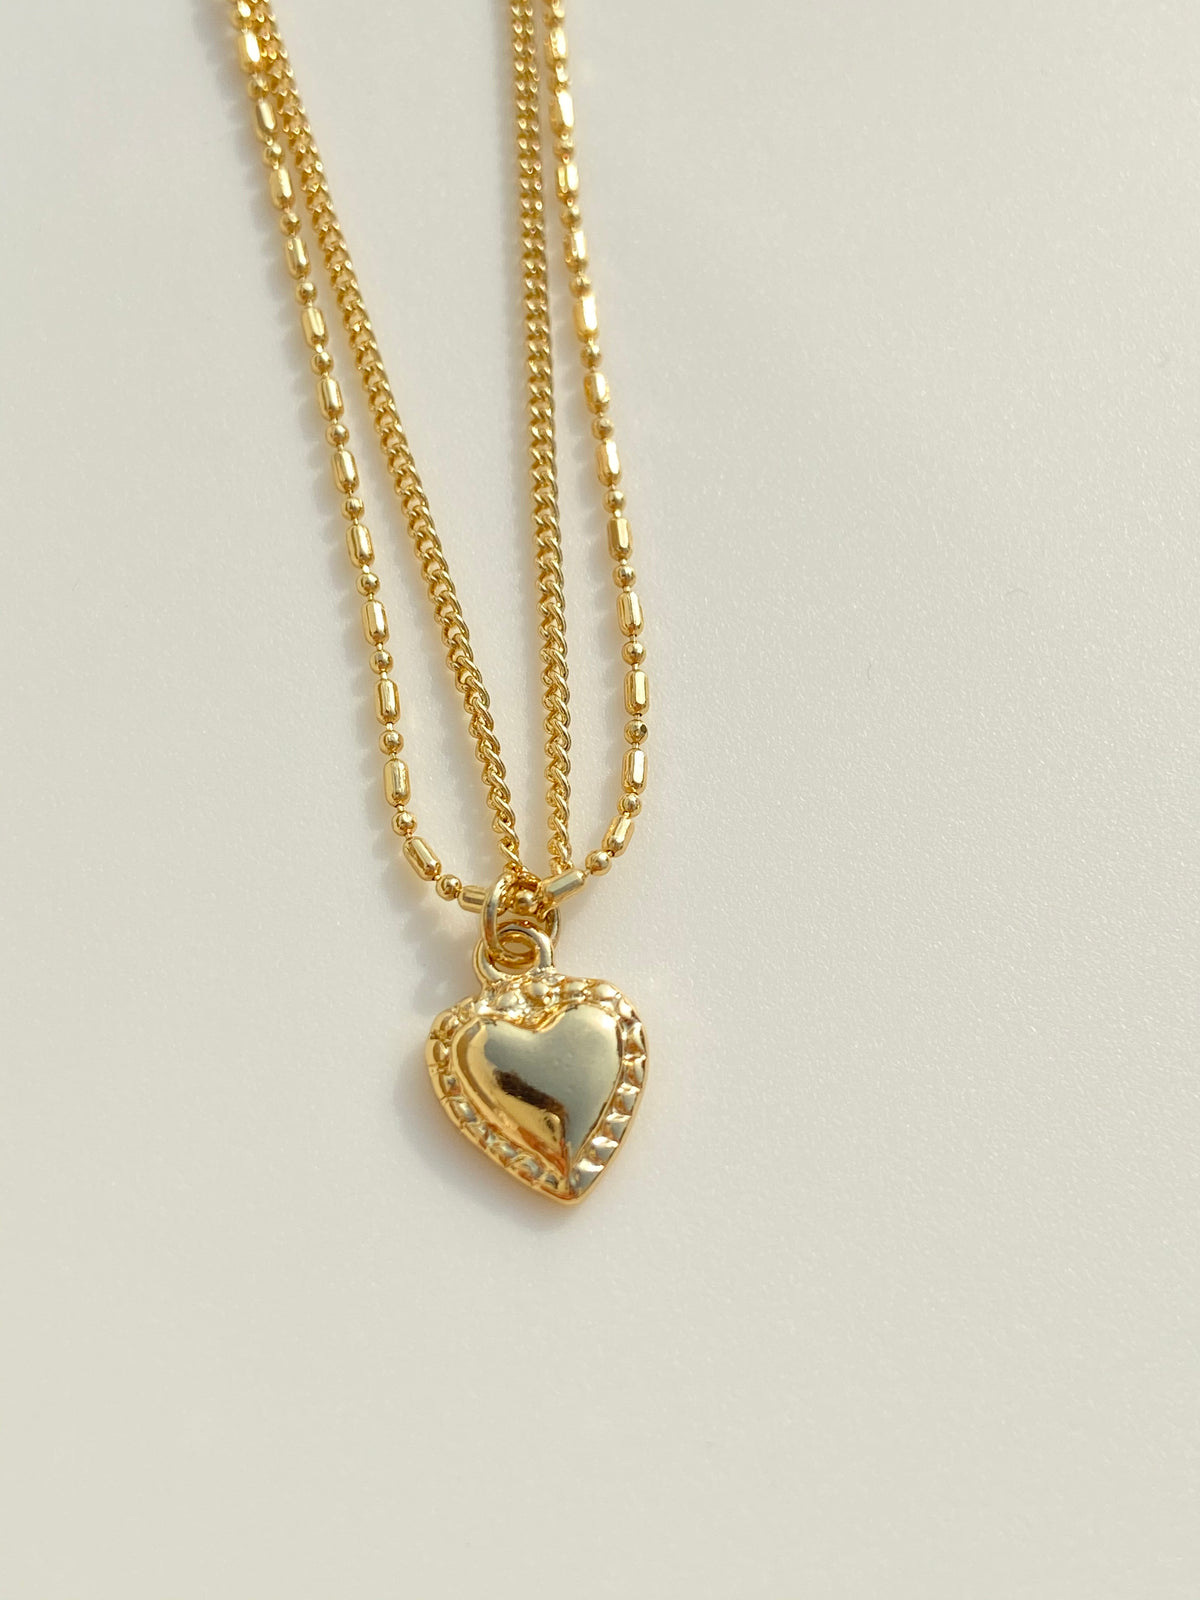 Vintage Gold Heart Layered Necklace